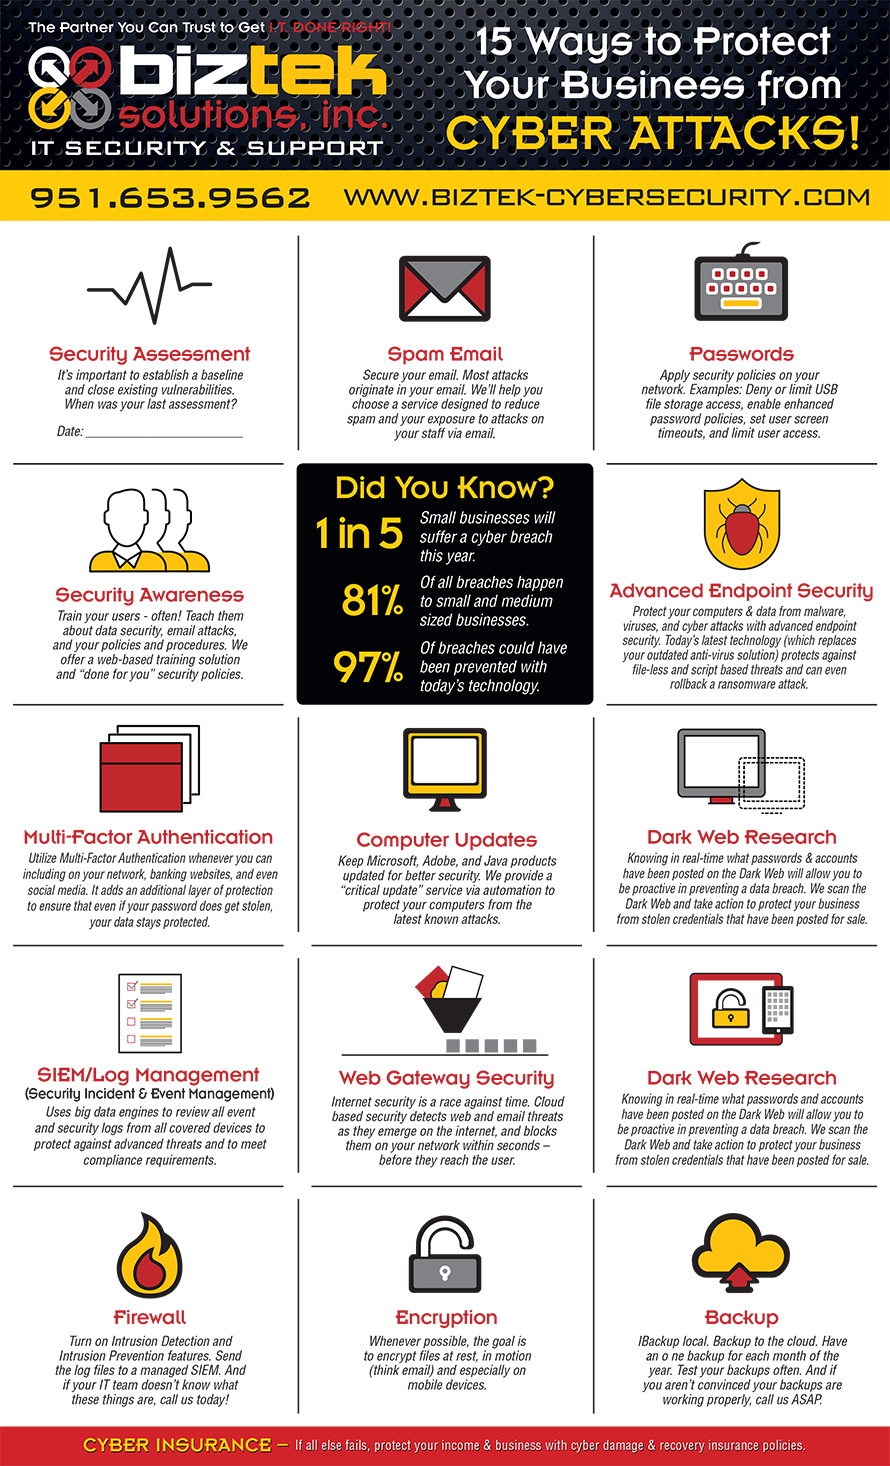 15 Ways to Protect Your Business from Cyber Attacks - Biztek Solutions